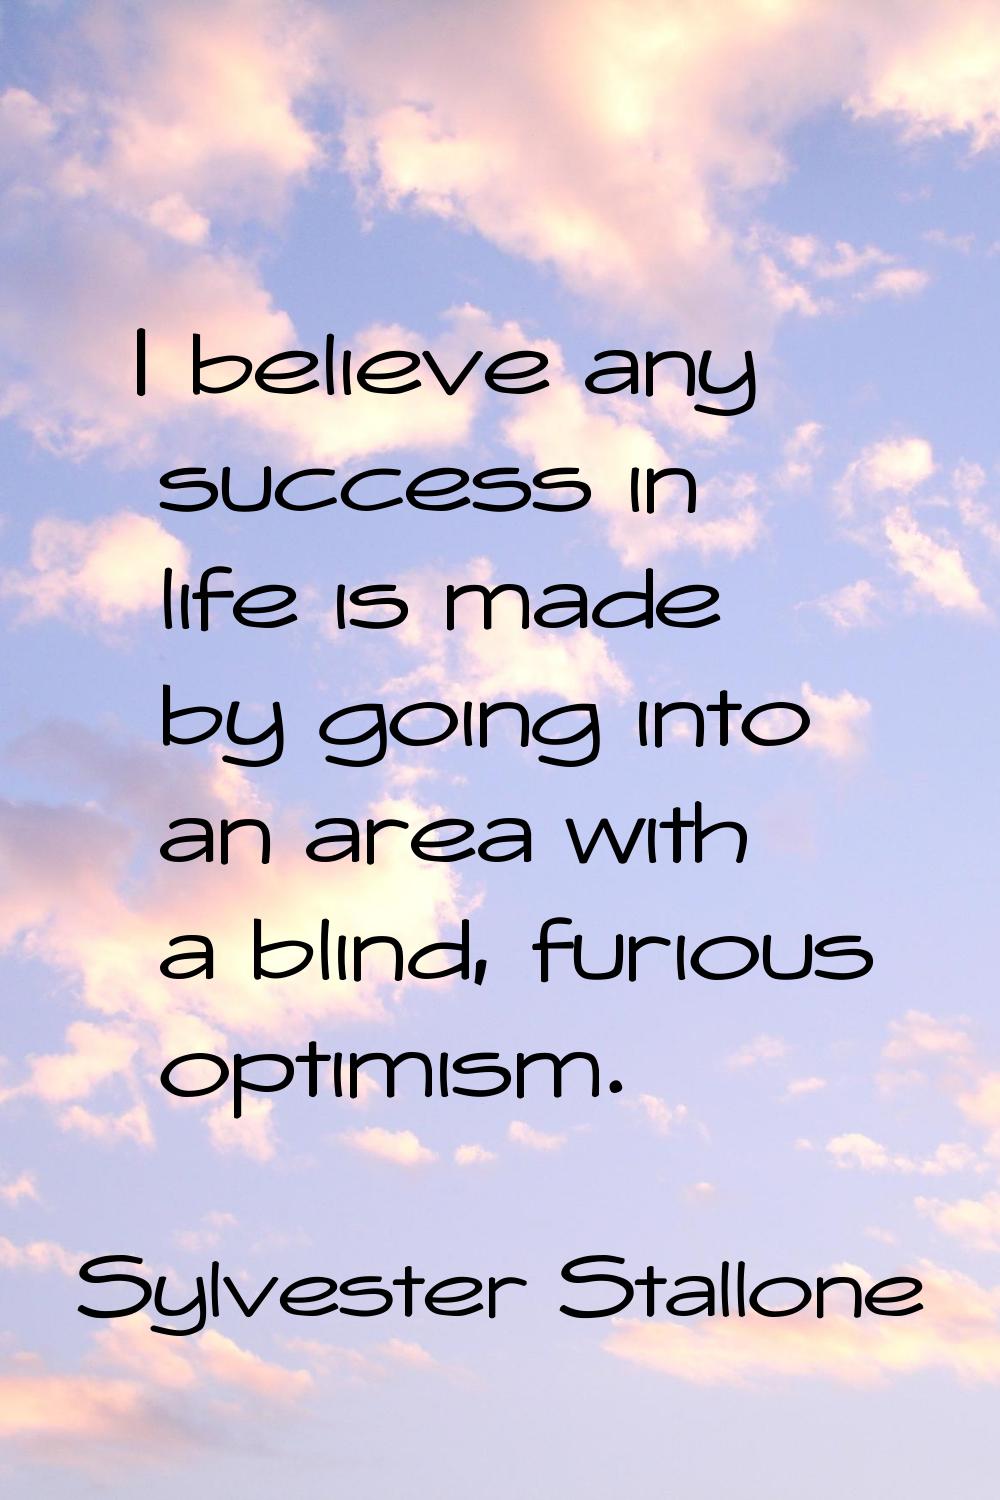 I believe any success in life is made by going into an area with a blind, furious optimism.